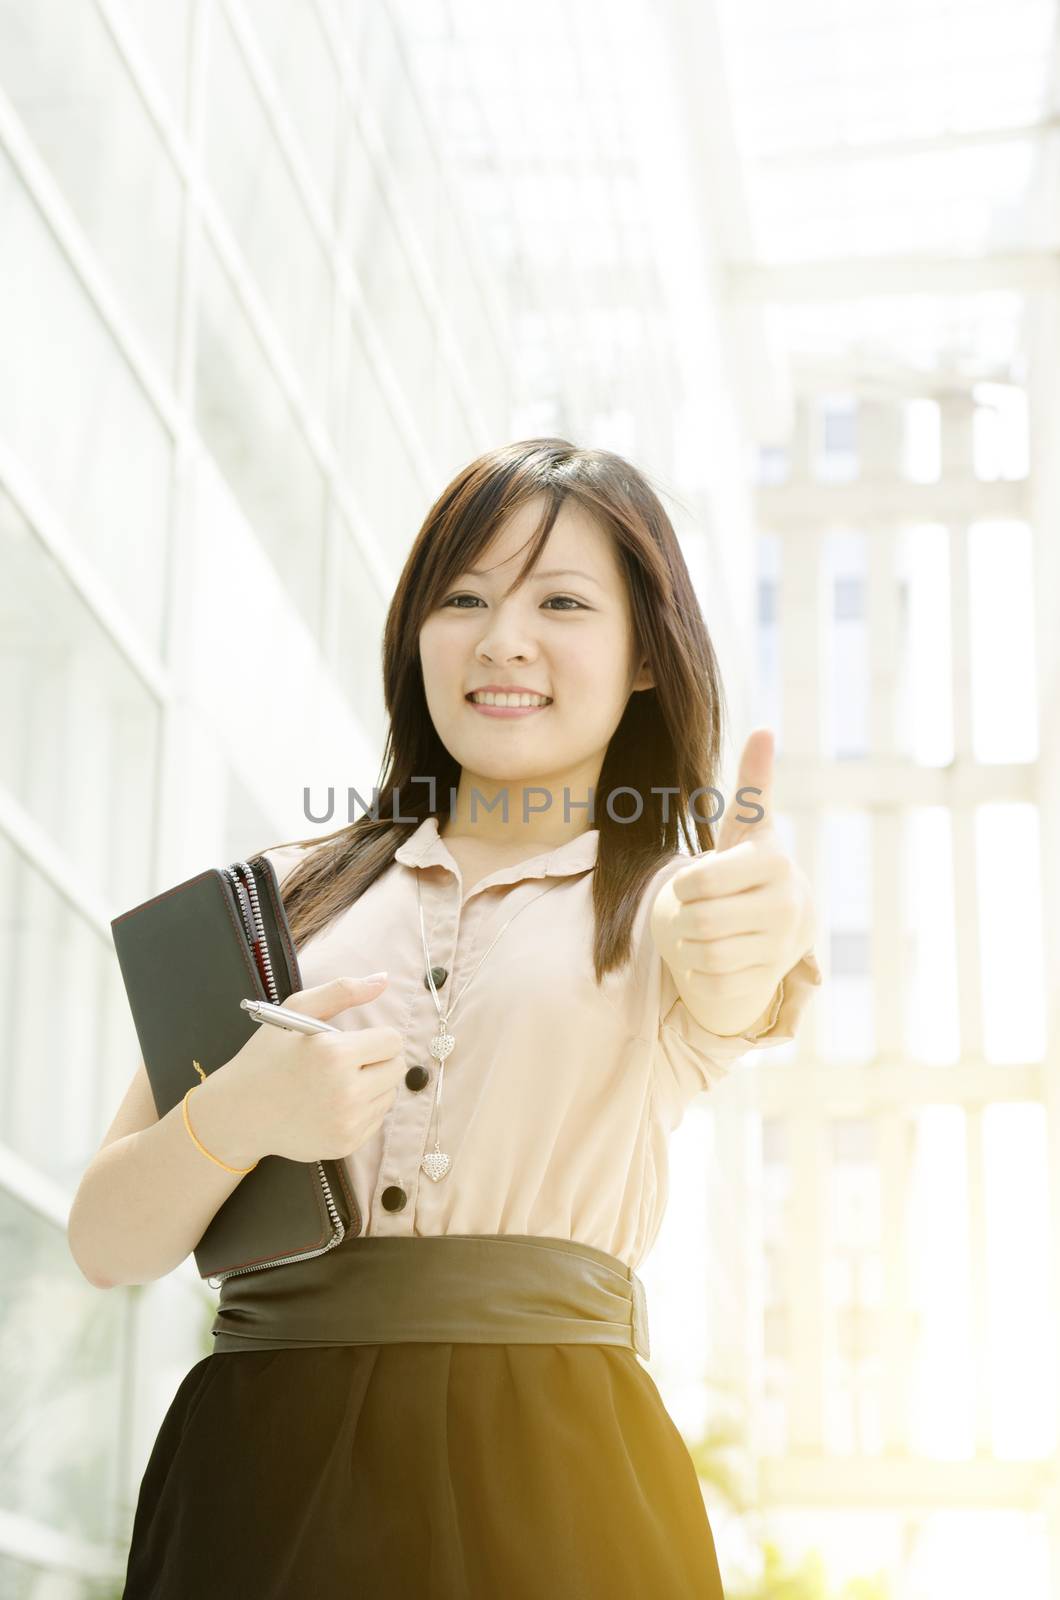 Young Asian business woman smiling and thumb up at an office environment, beautiful golden sunlight at background.